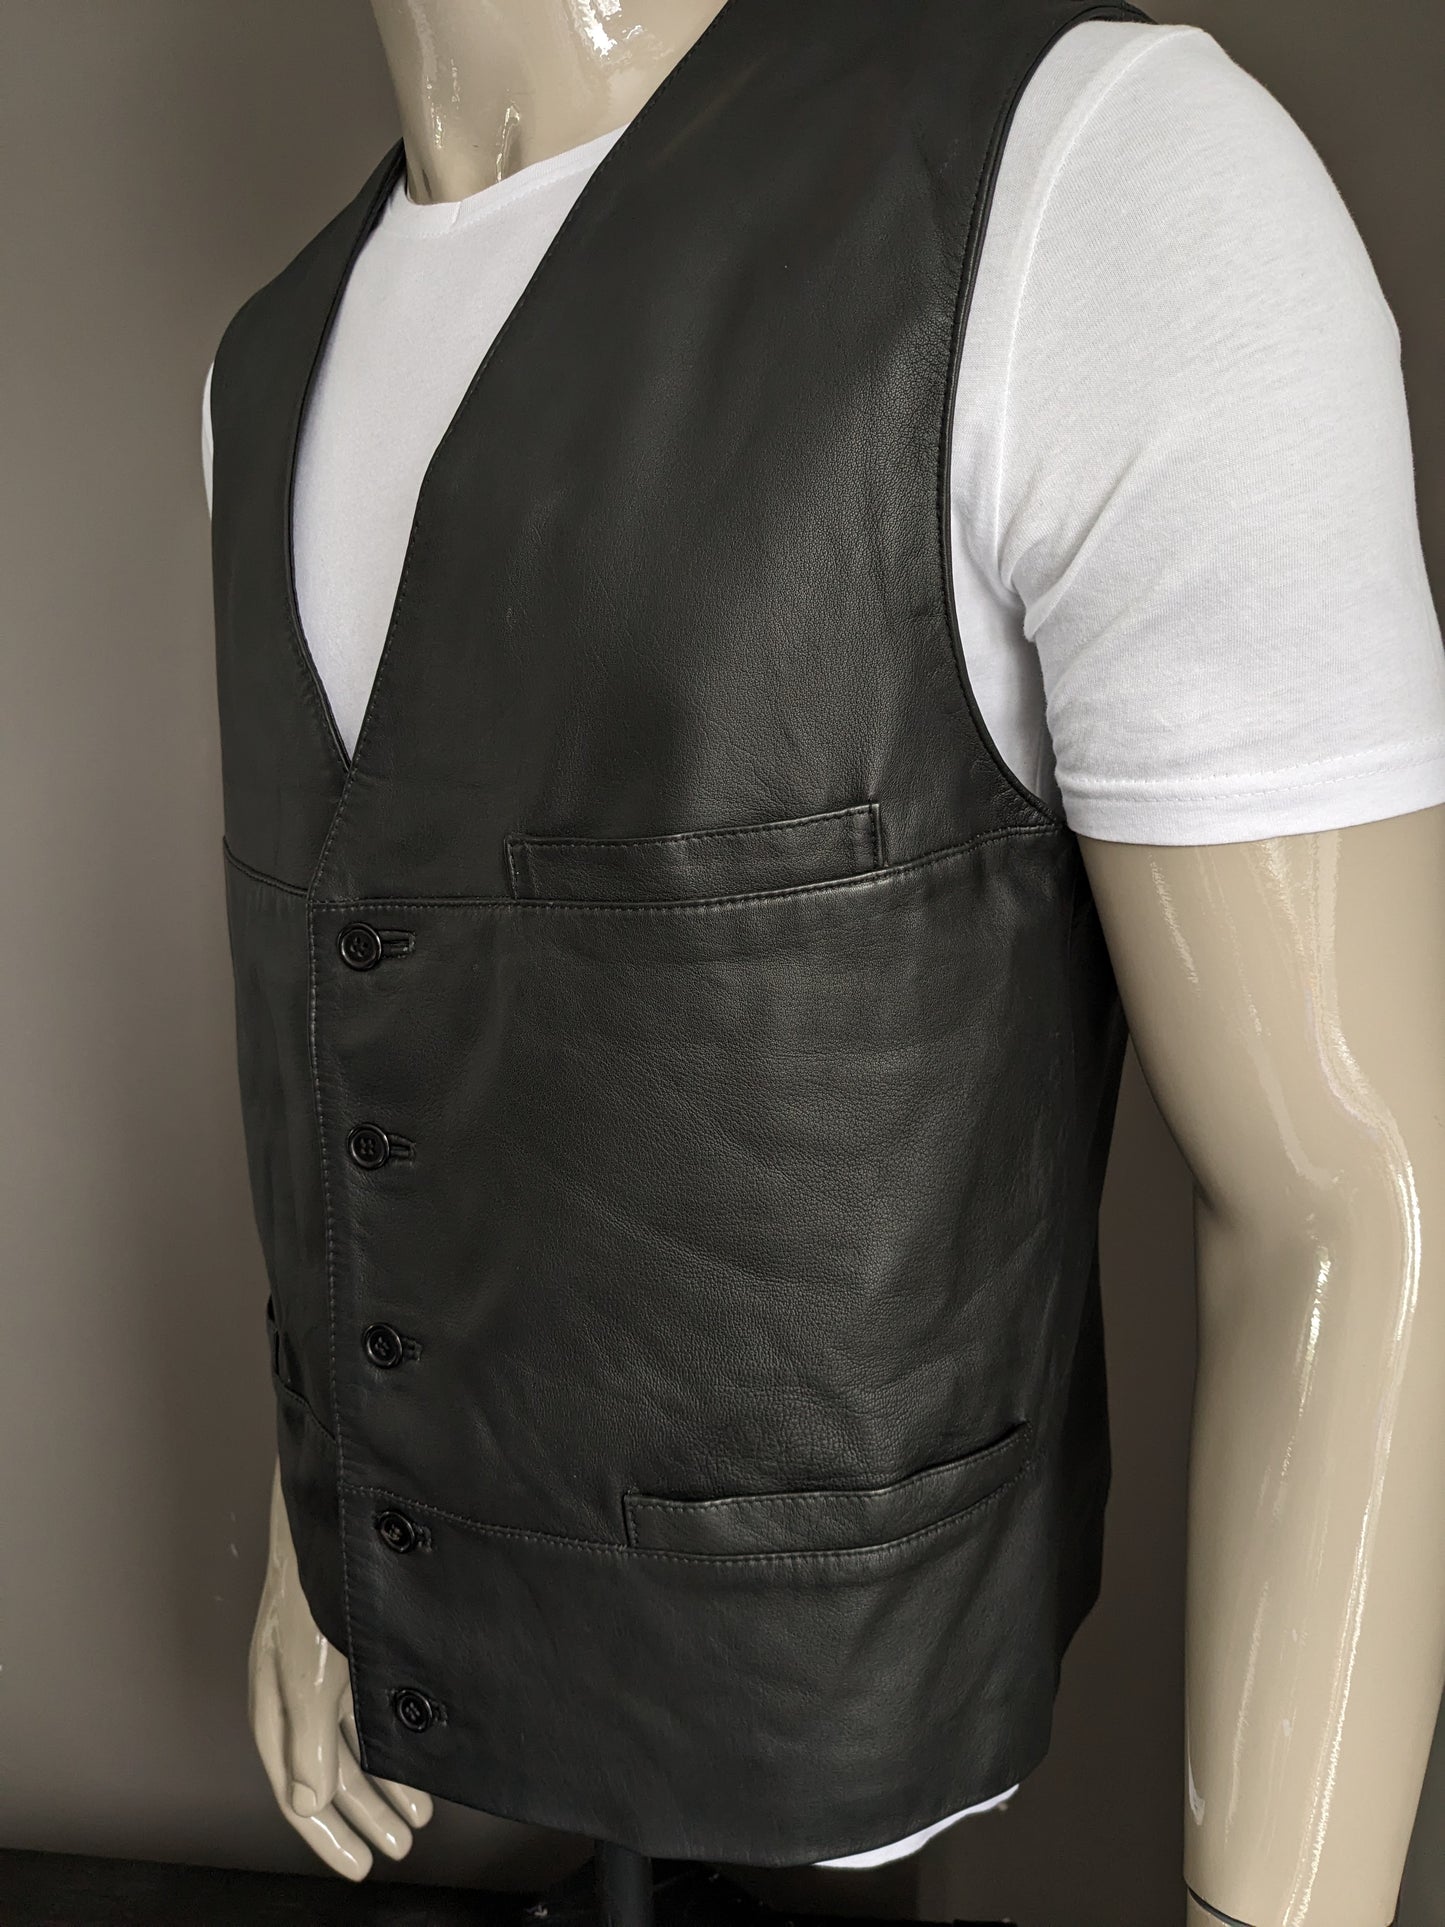 Double -sided Striwa leather waistcoat with 2 inner pockets. Black. Size L. #319